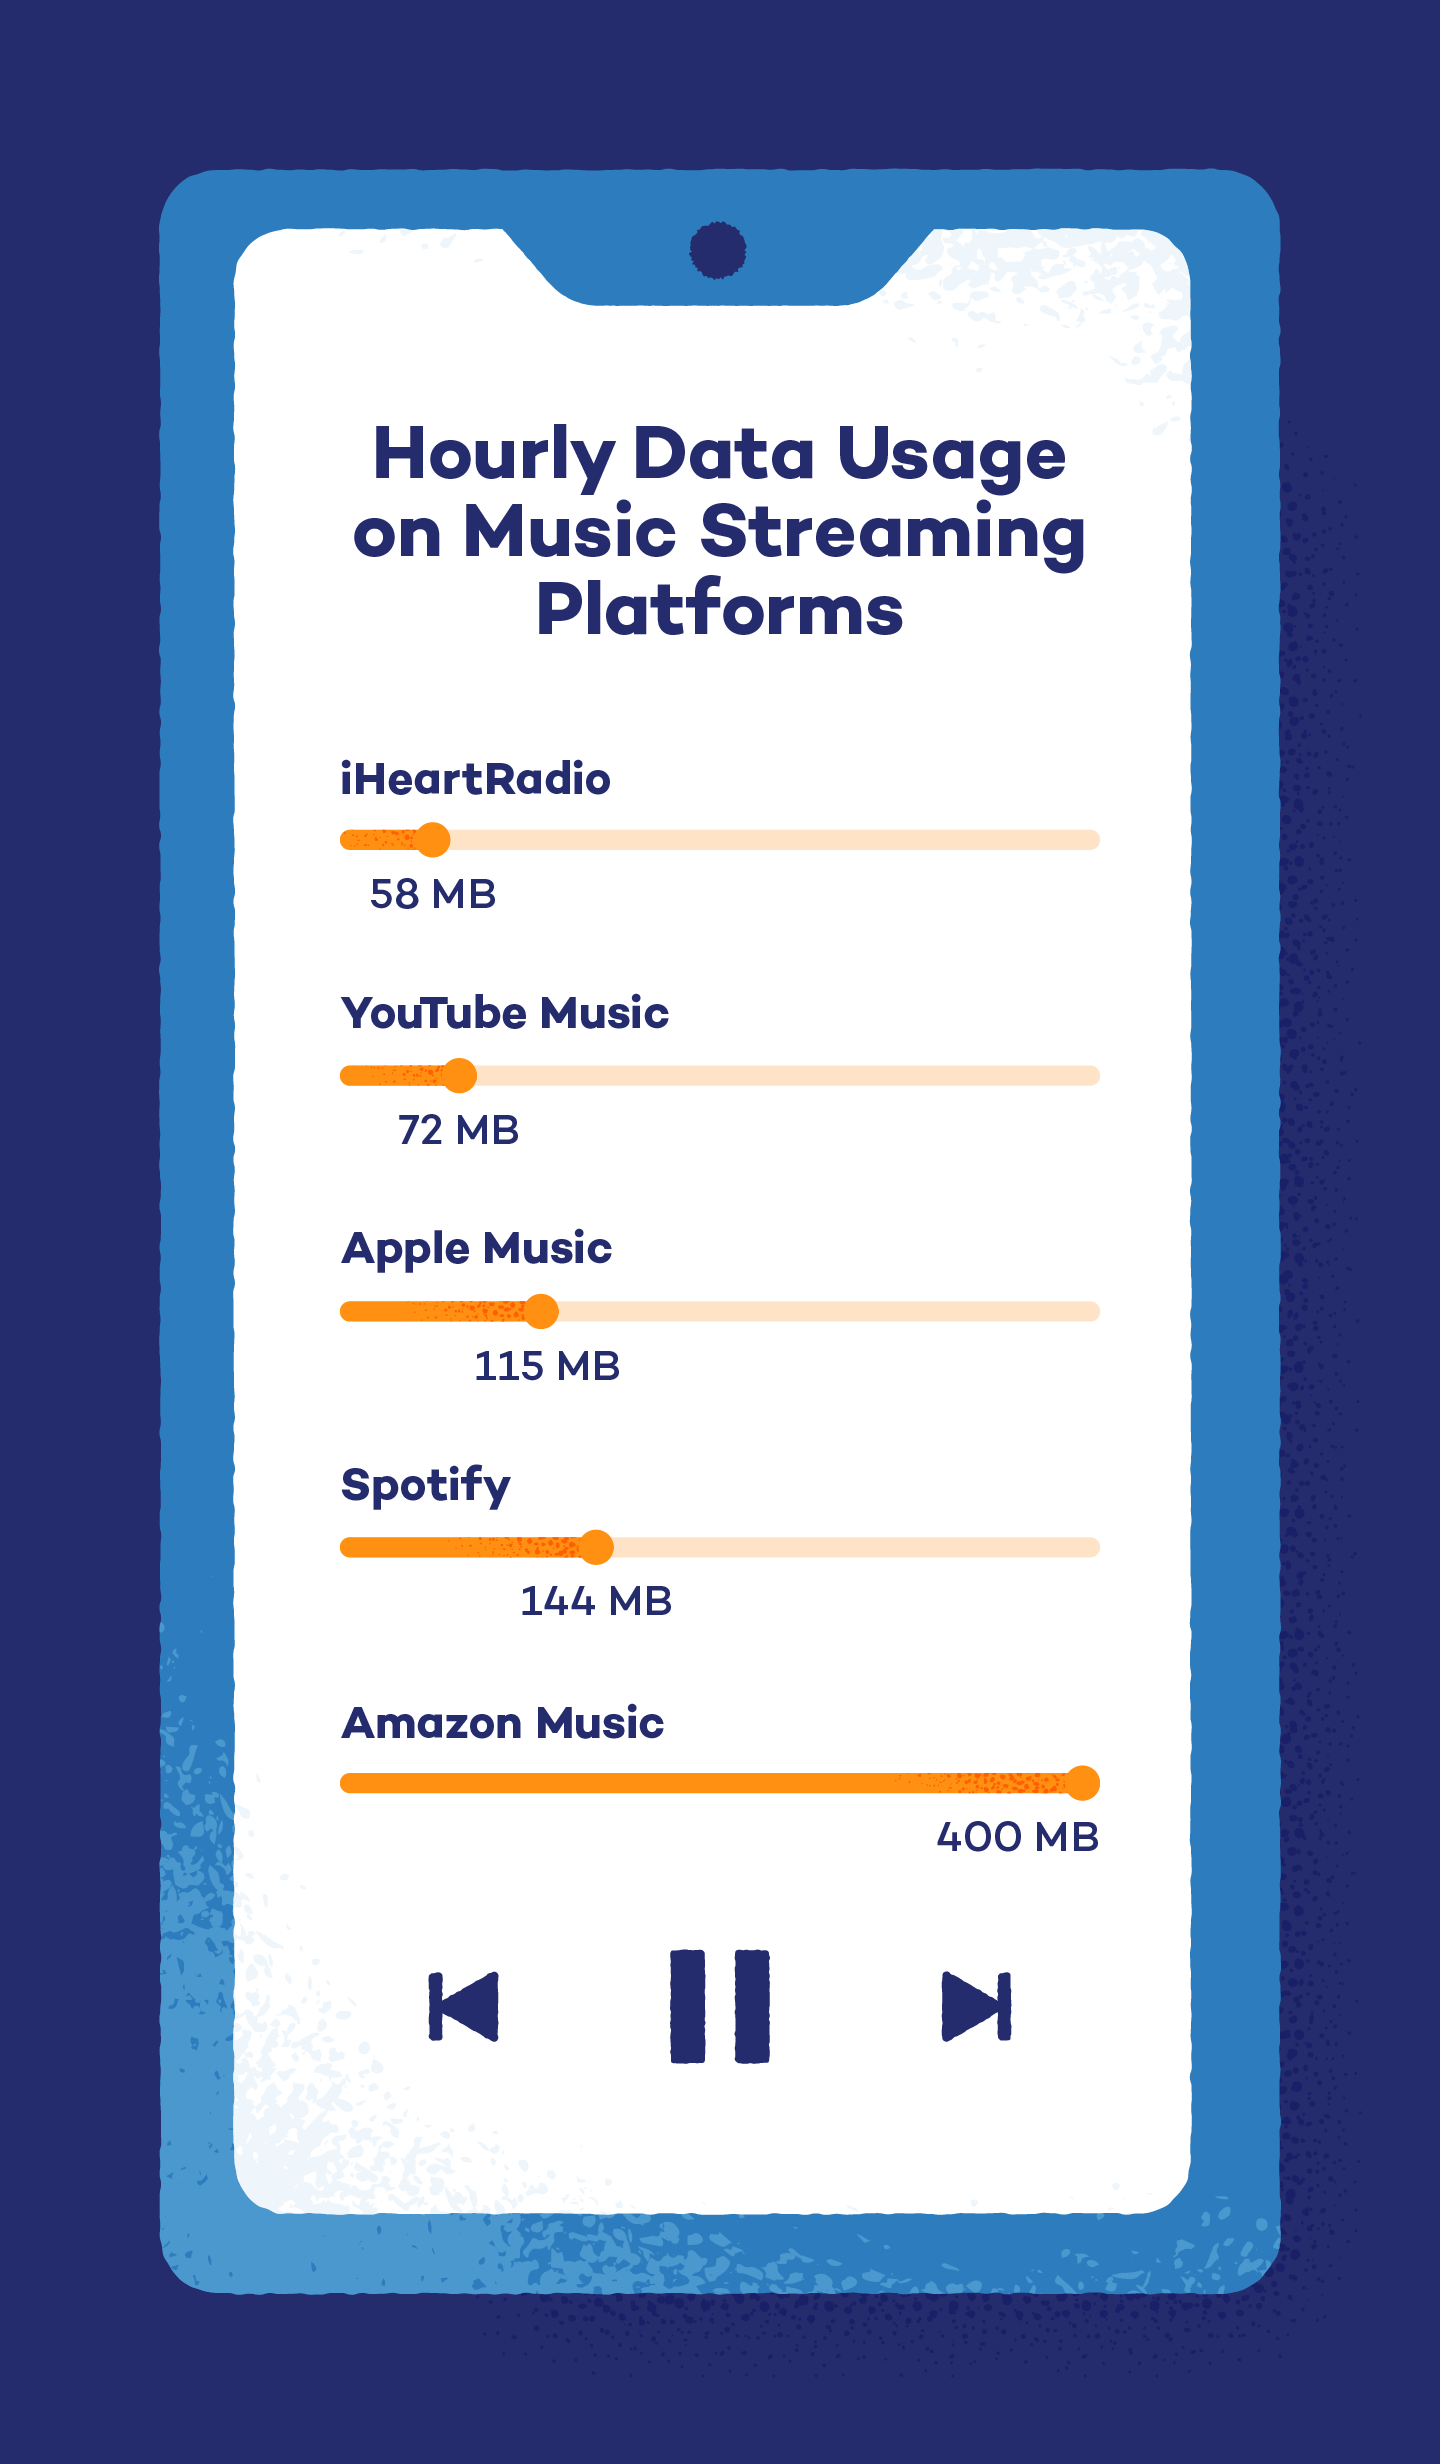 Graphic showing how much data different music streaming platforms use